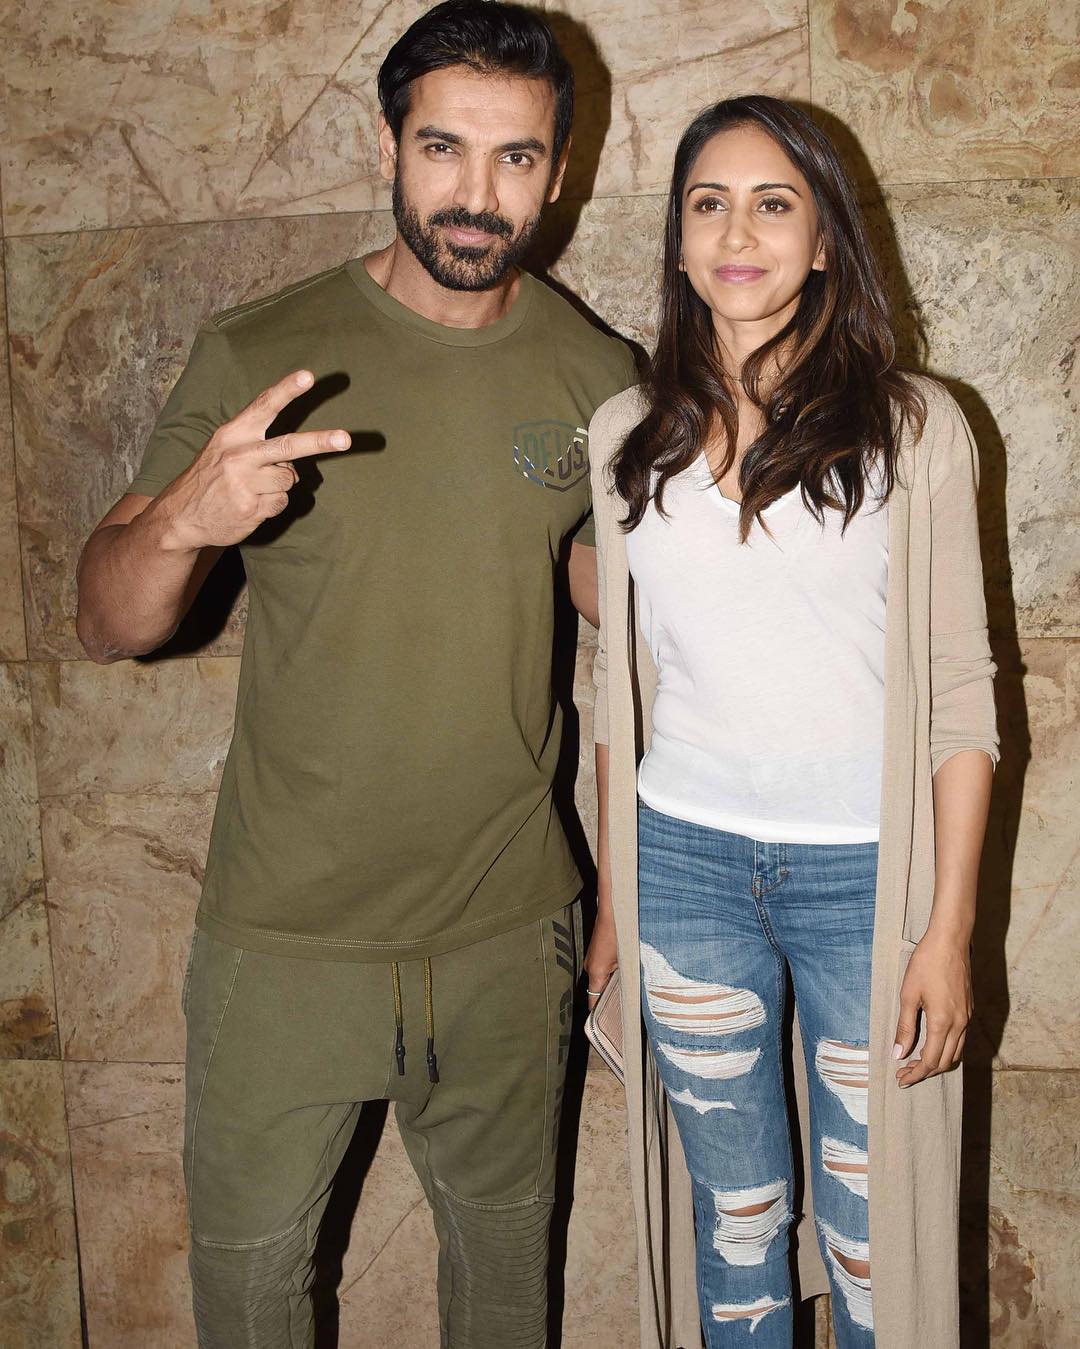 EXCLUSIVE - John Abraham on wife Priya Runchal: I think she brings a lot of maturity to the relationship